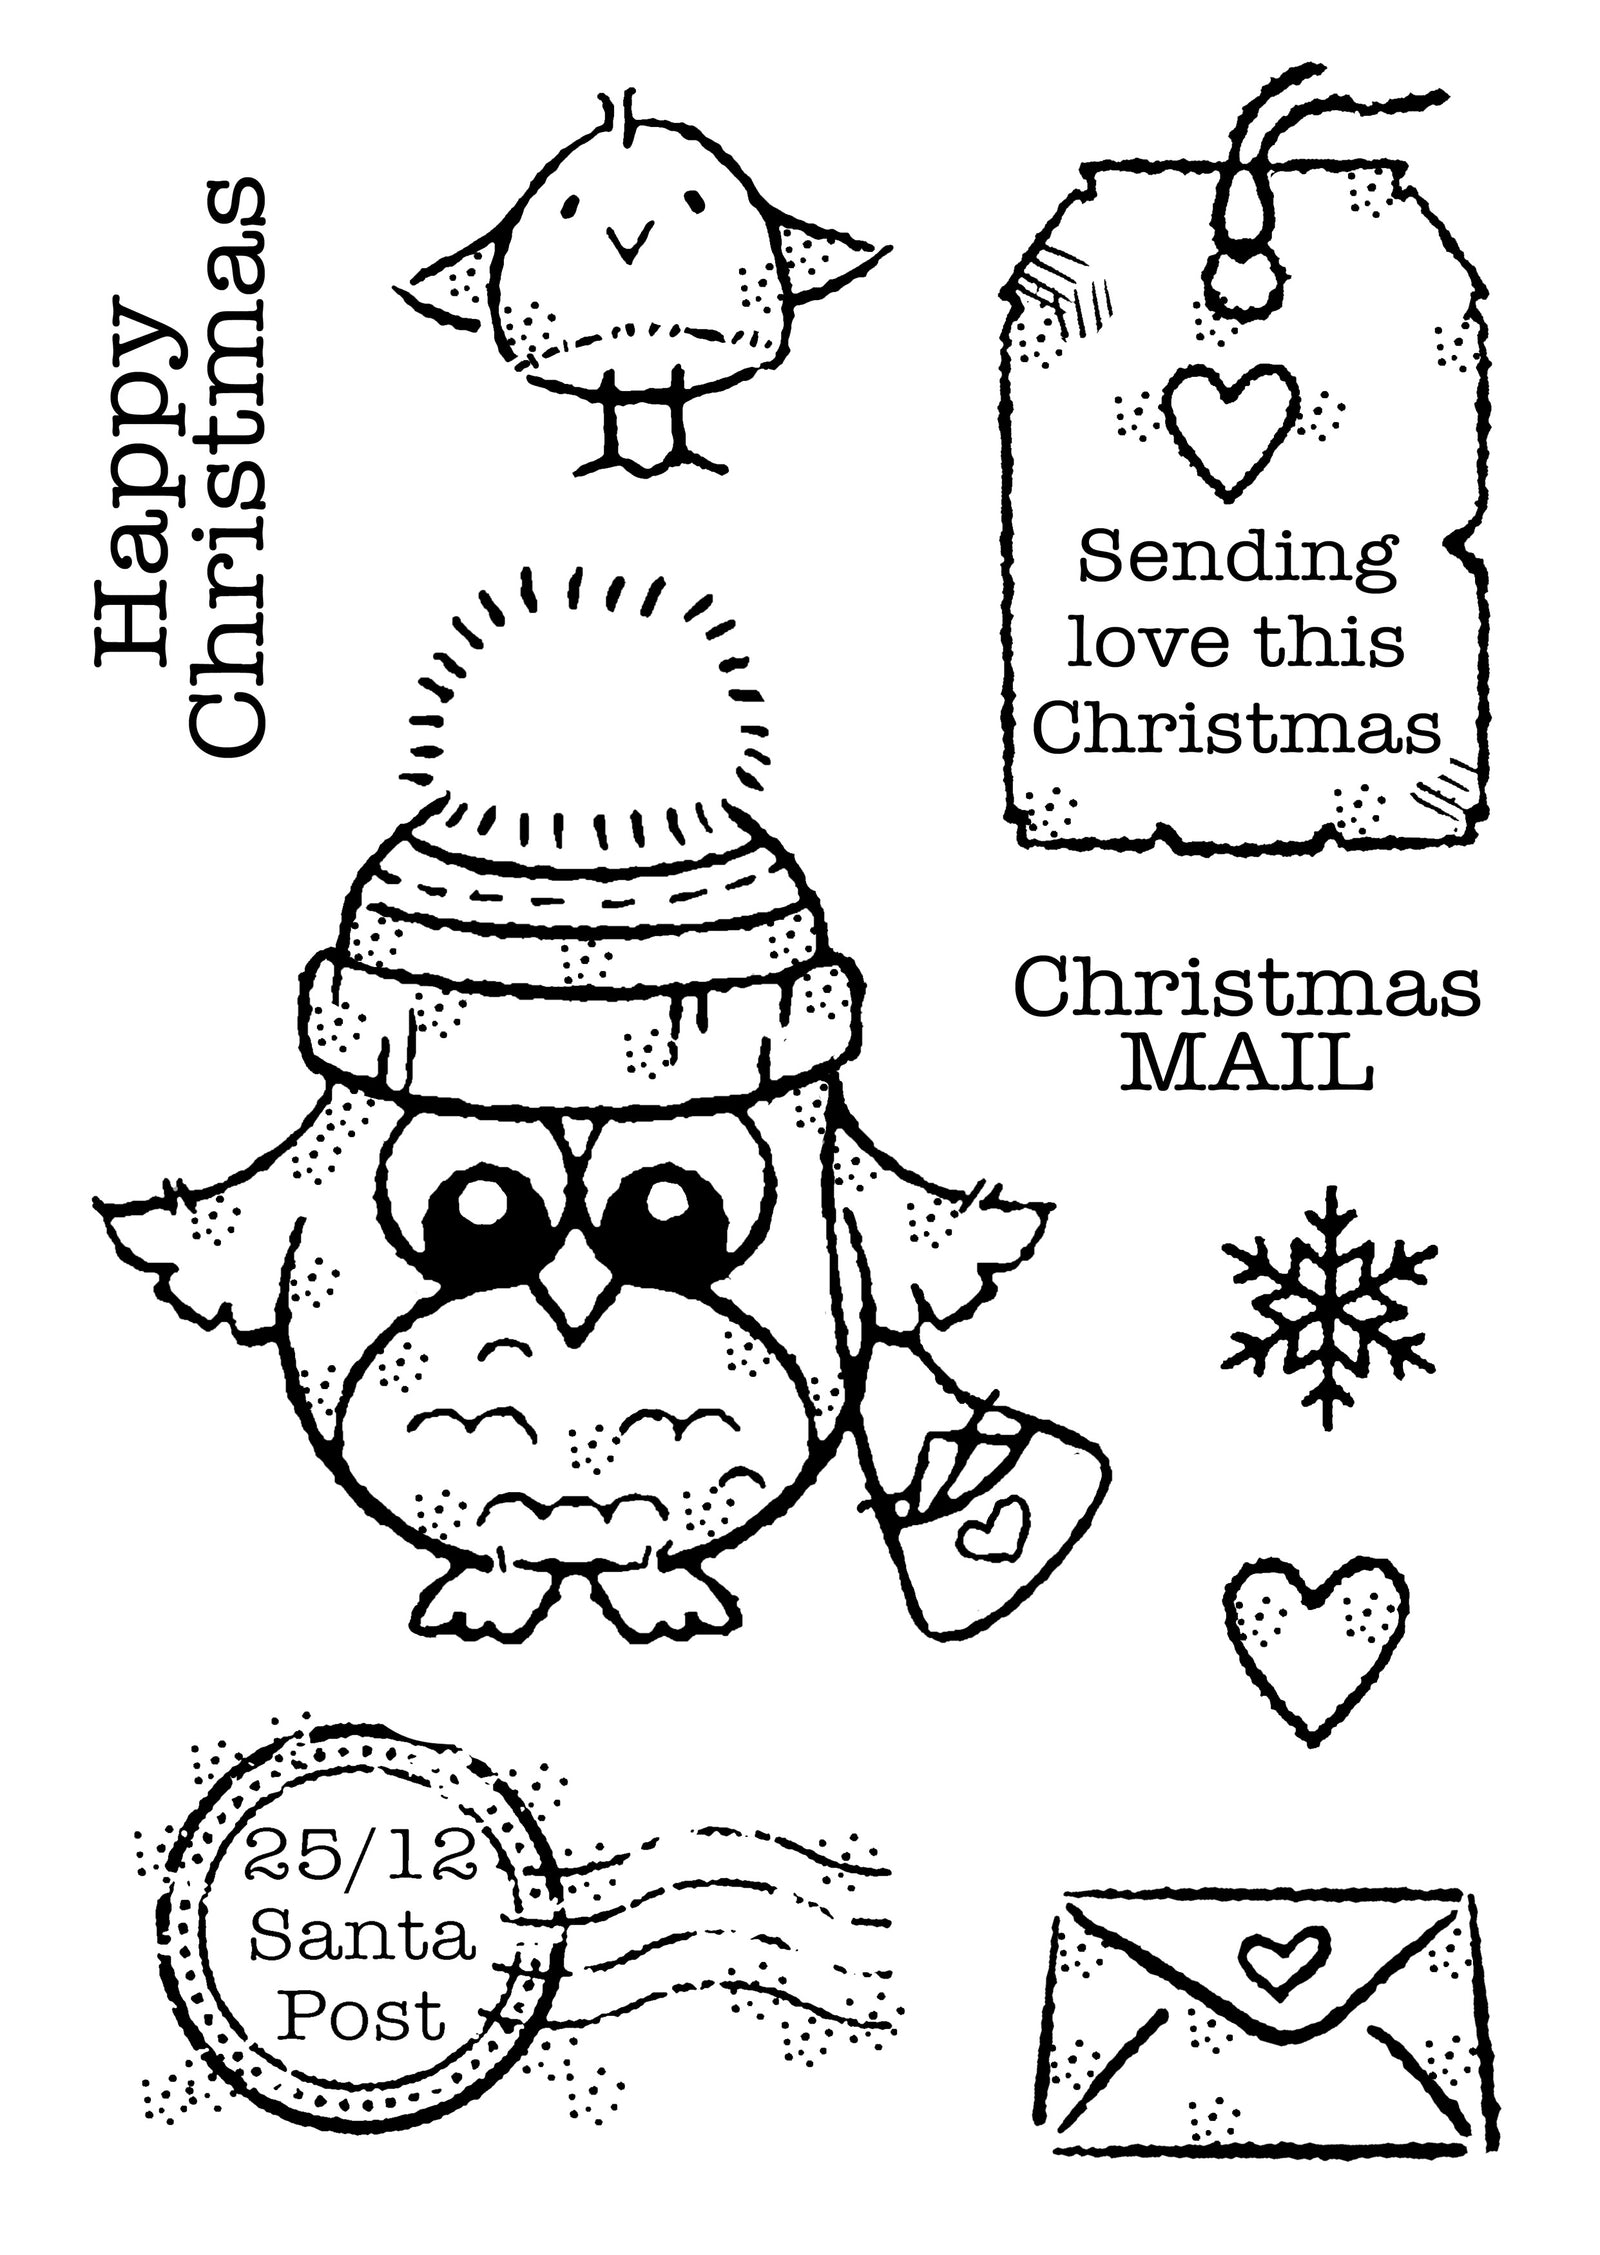 Owl Christmas Mail - Clear Stamp - Woodware Craft Collection - 4X6